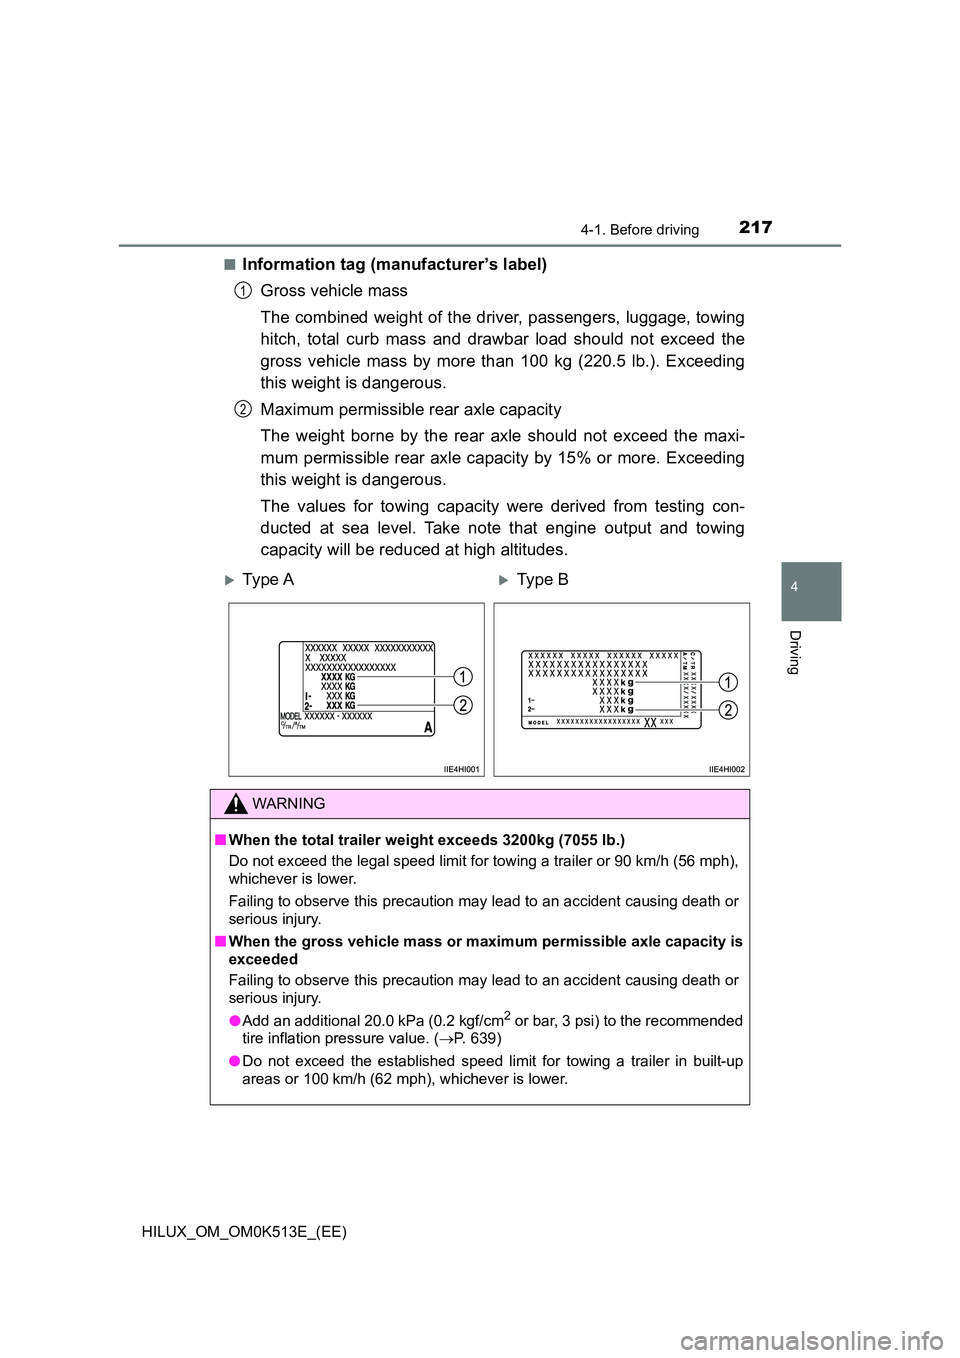 TOYOTA HILUX 2021  Owners Manual (in English) 2174-1. Before driving
4
Driving
HILUX_OM_OM0K513E_(EE) 
�QInformation tag (manufacturer’s label) 
Gross vehicle mass 
The combined weight of the driver, passengers, luggage, towing 
hitch, total cu